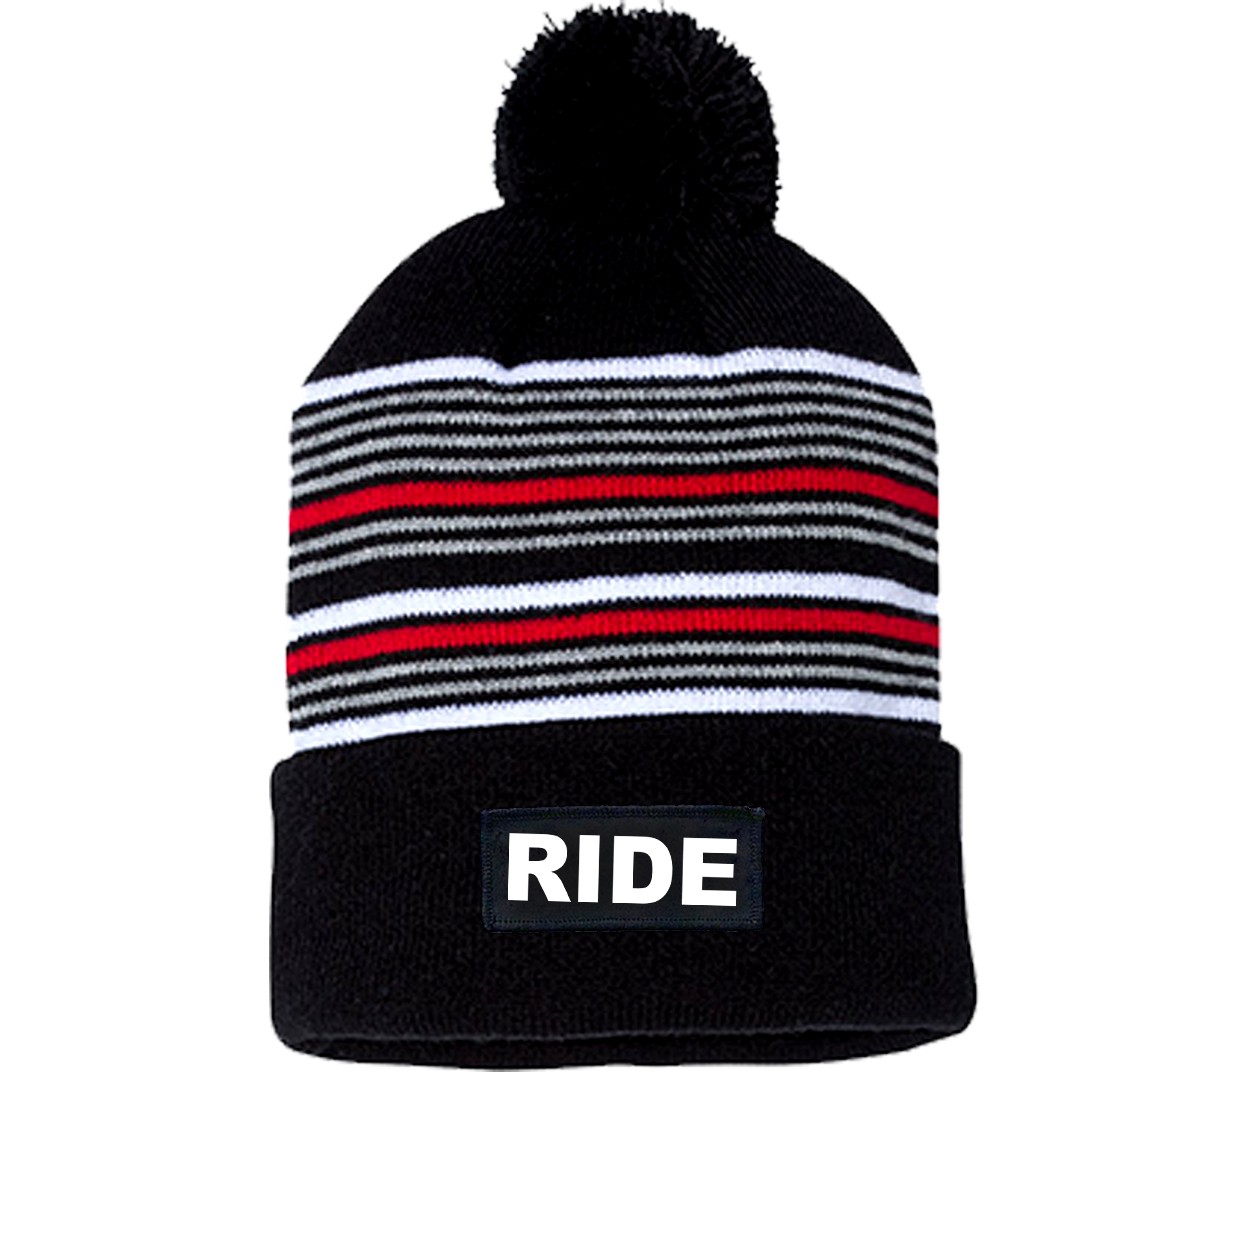 Ride Brand Logo Night Out Woven Patch Roll Up Pom Knit Beanie Black/ White/ Grey/ Red Beanie (White Logo)